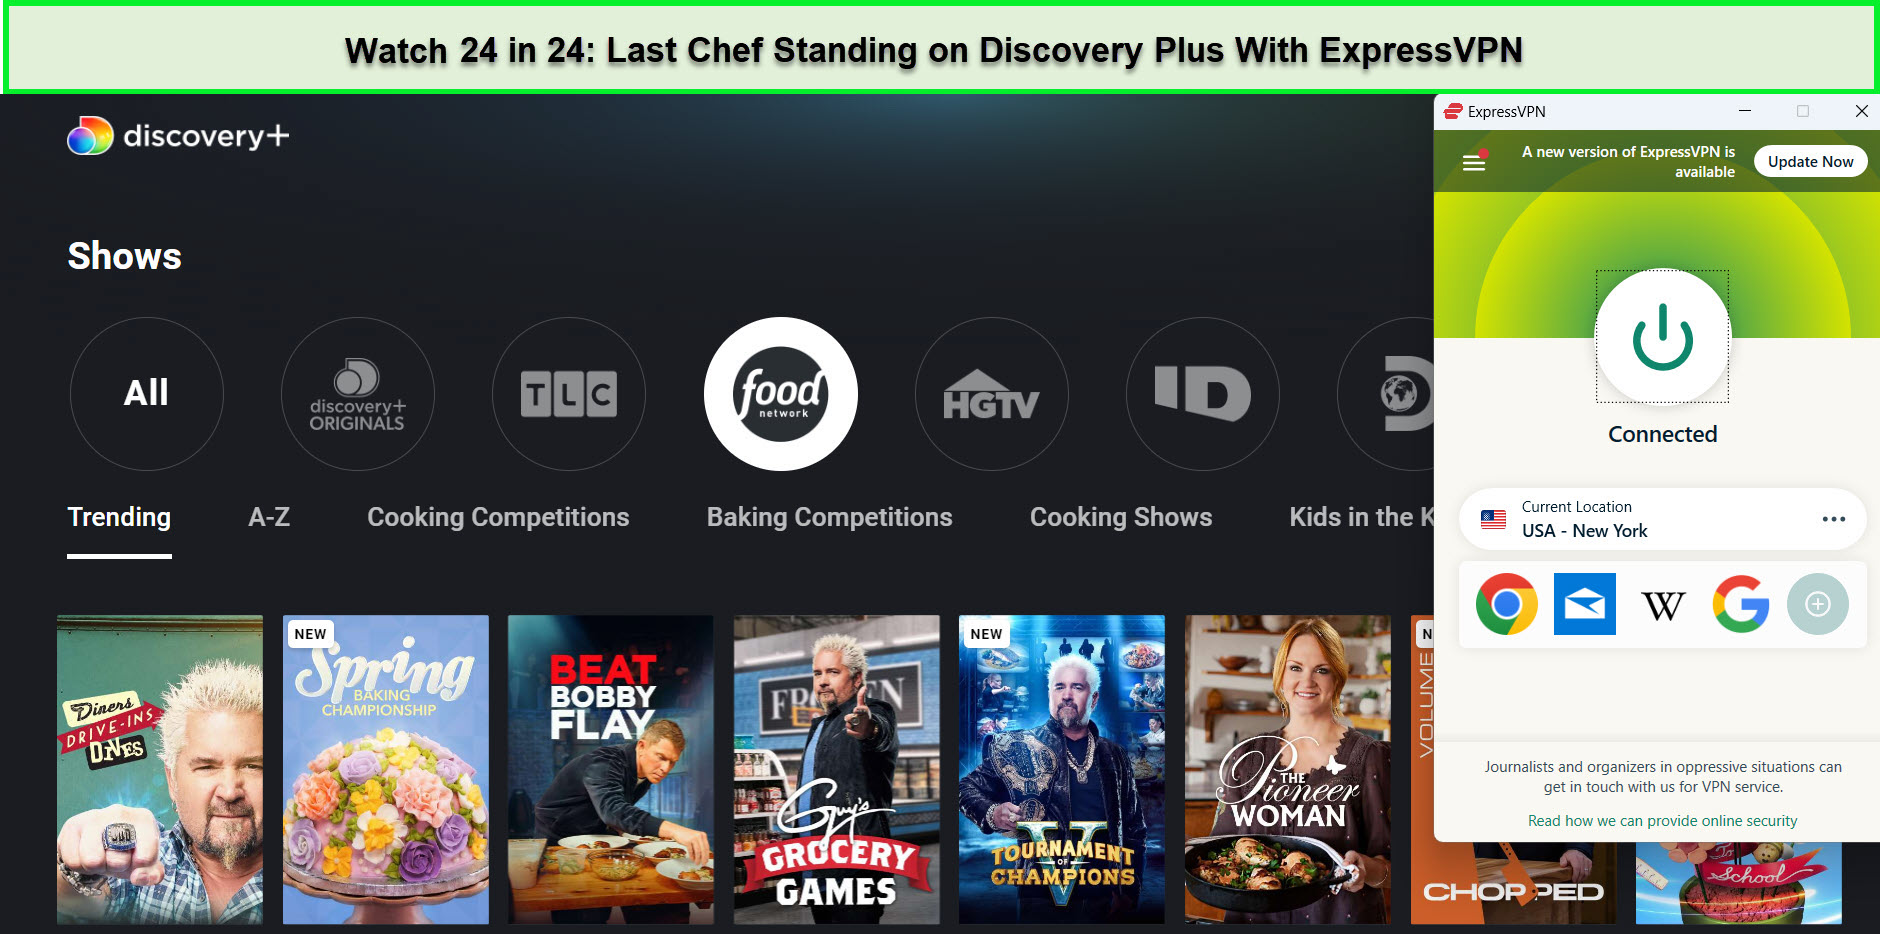 Watch-24-in-24-Last-Chef-Standing-outside-USA-on-Discovery-Plus-with-ExpressVPN